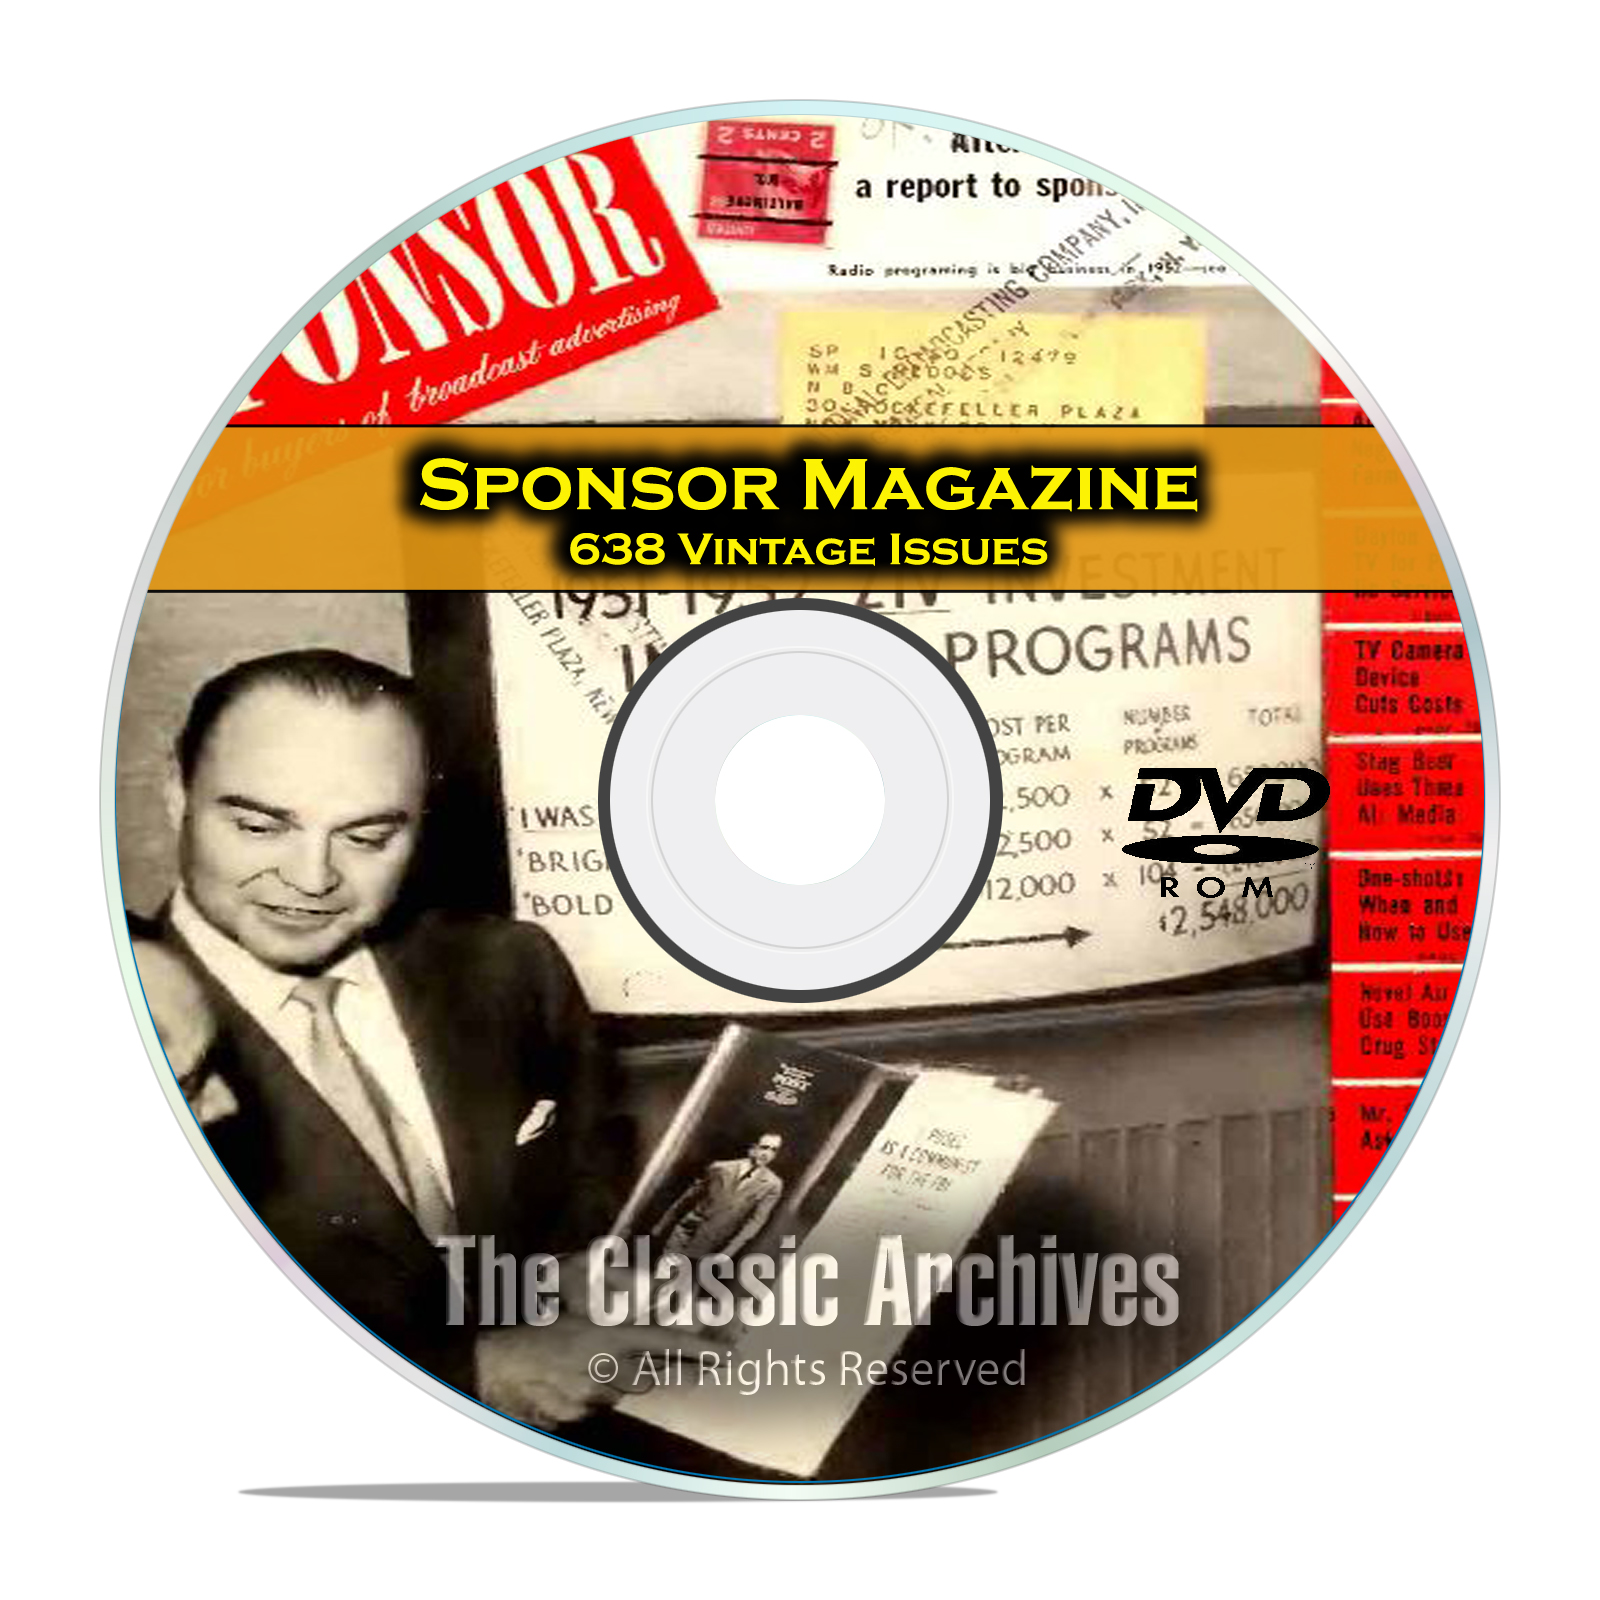 Sponsor Magazine, 638 Vintage Issues, Radio and Television Advertising, DVD